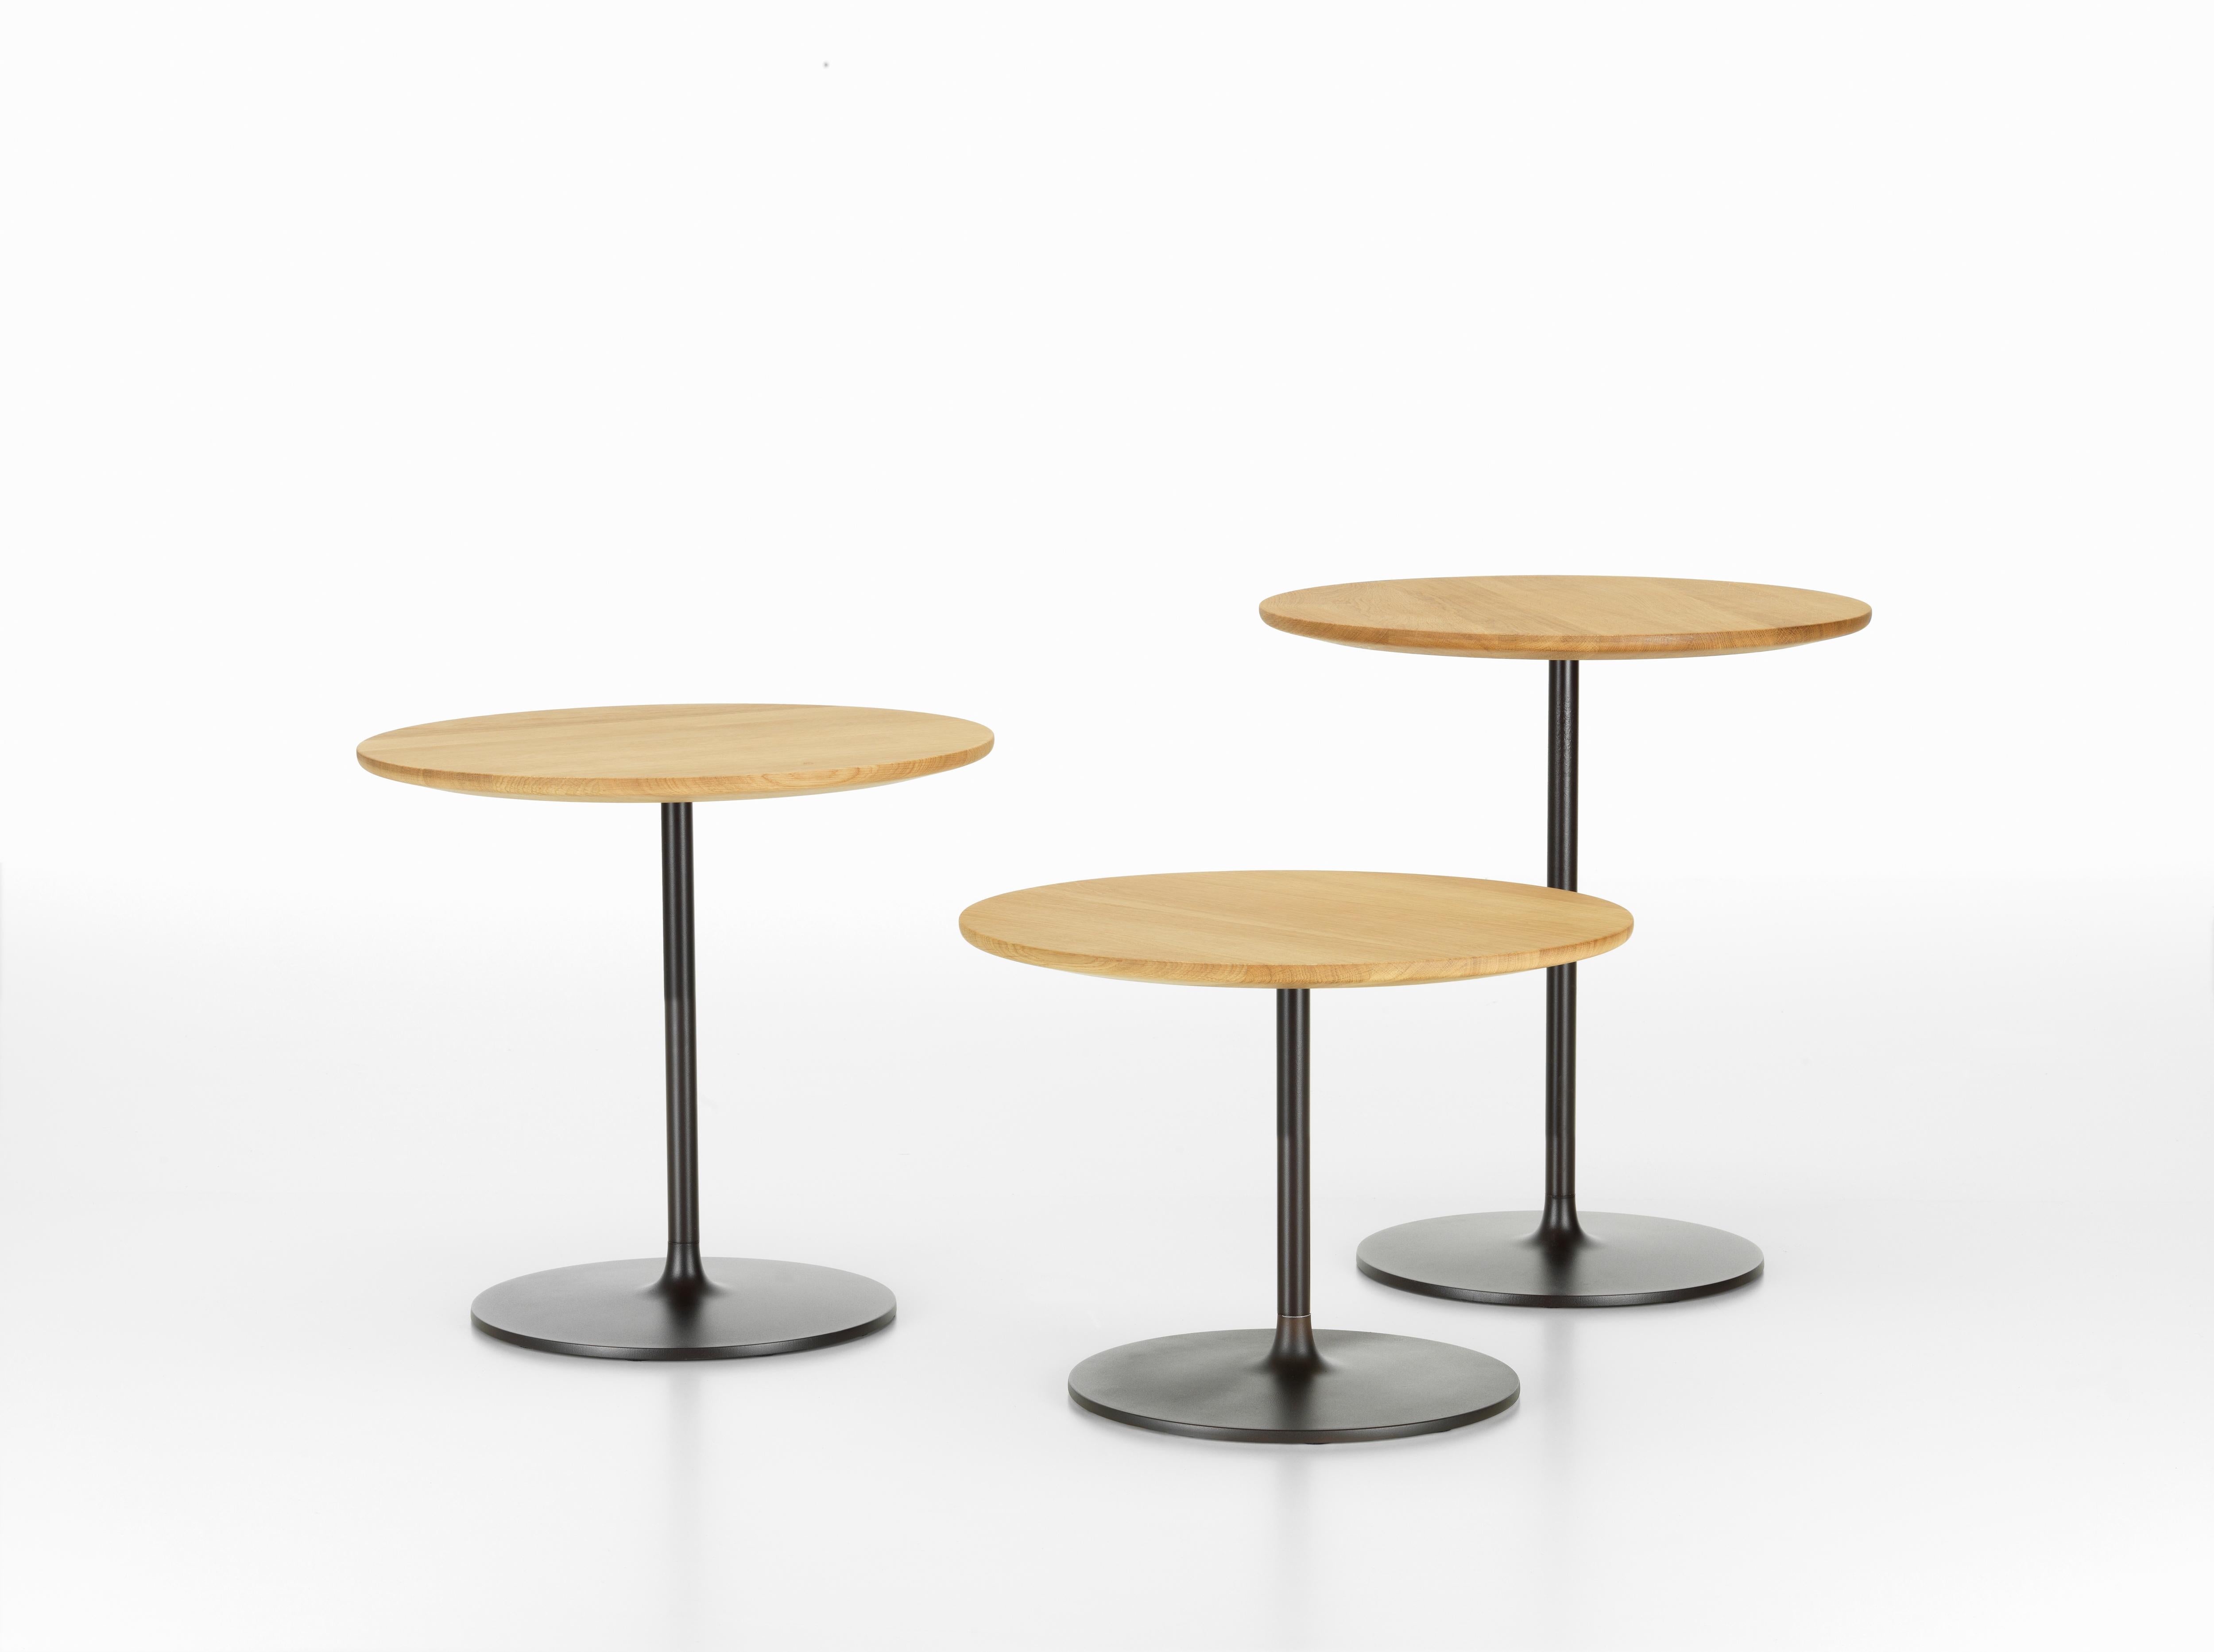 These products are only available in the United States.

The occasional tables by Jasper Morrison have an understated look and come in three heights – ranging from a low side table to a standard serving table. They have round, beveled-edge tops